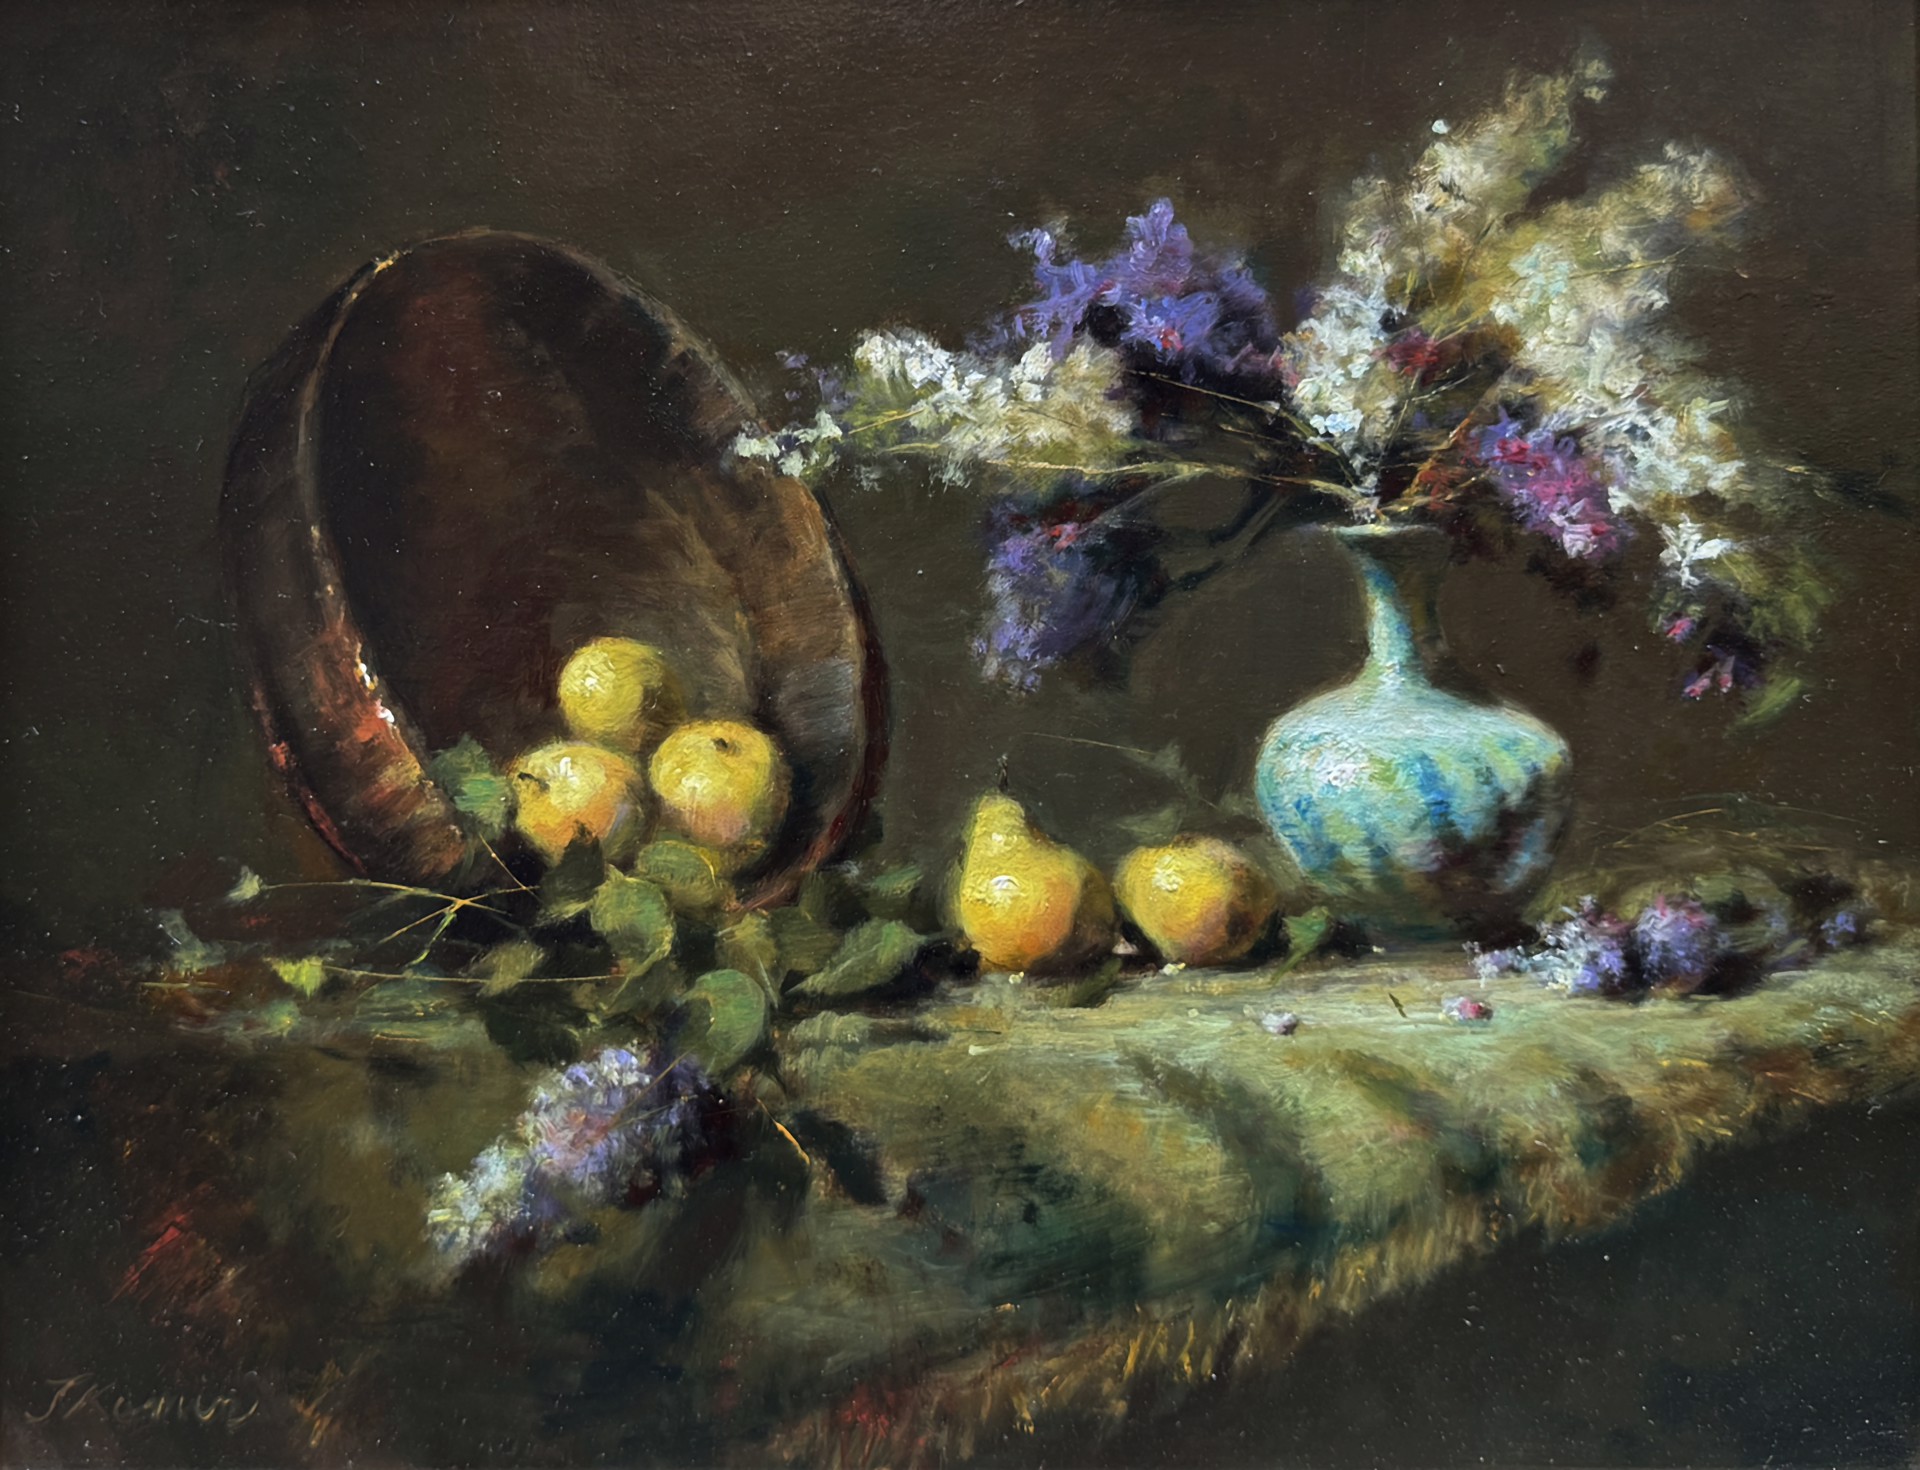 Lilacs with Pears with Turquoise Vase by Jacqueline Kamin